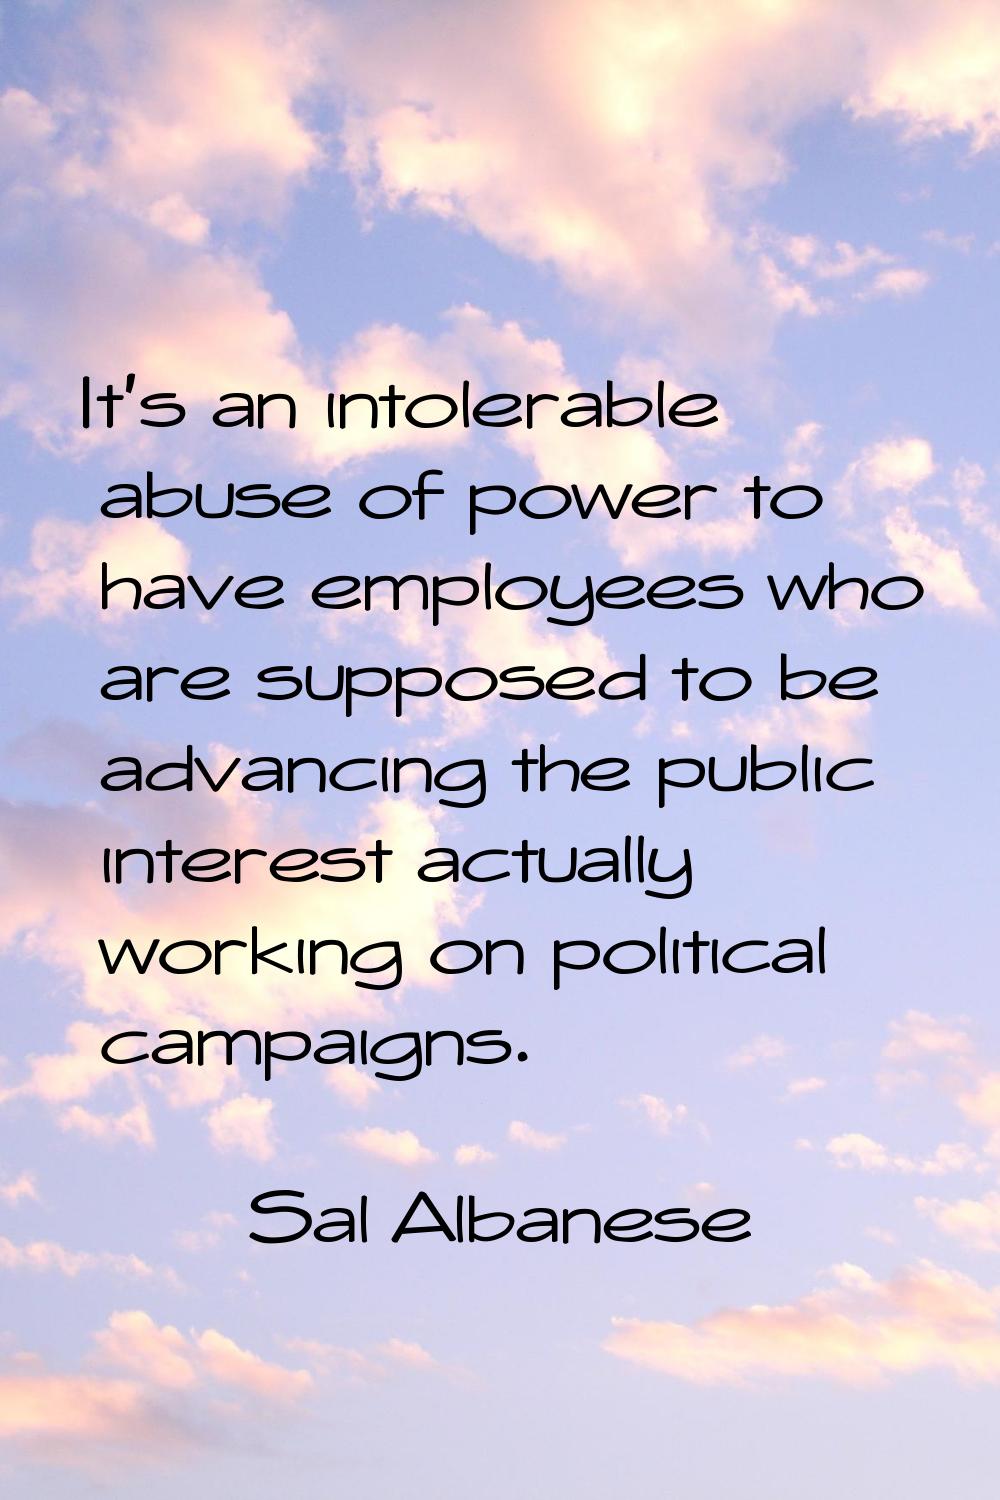 It's an intolerable abuse of power to have employees who are supposed to be advancing the public in